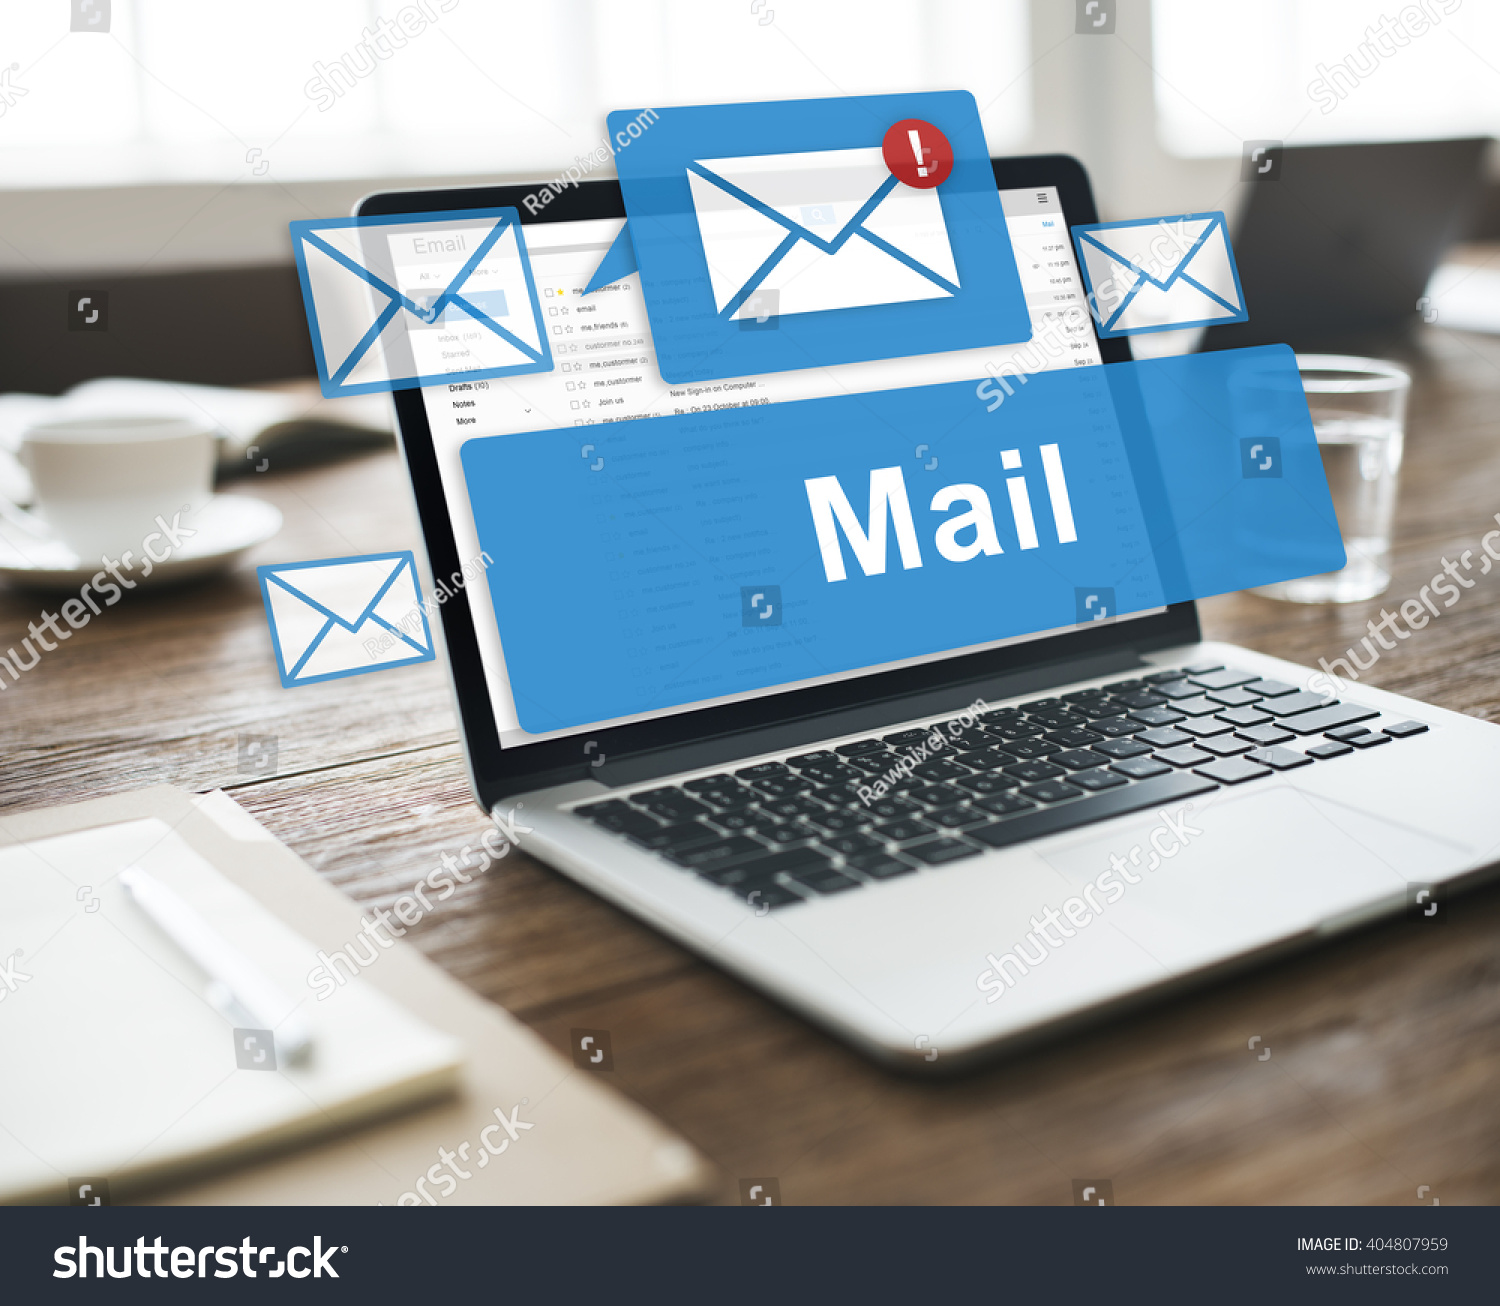 Mail Communication Connection Global Letters Concept #404807959